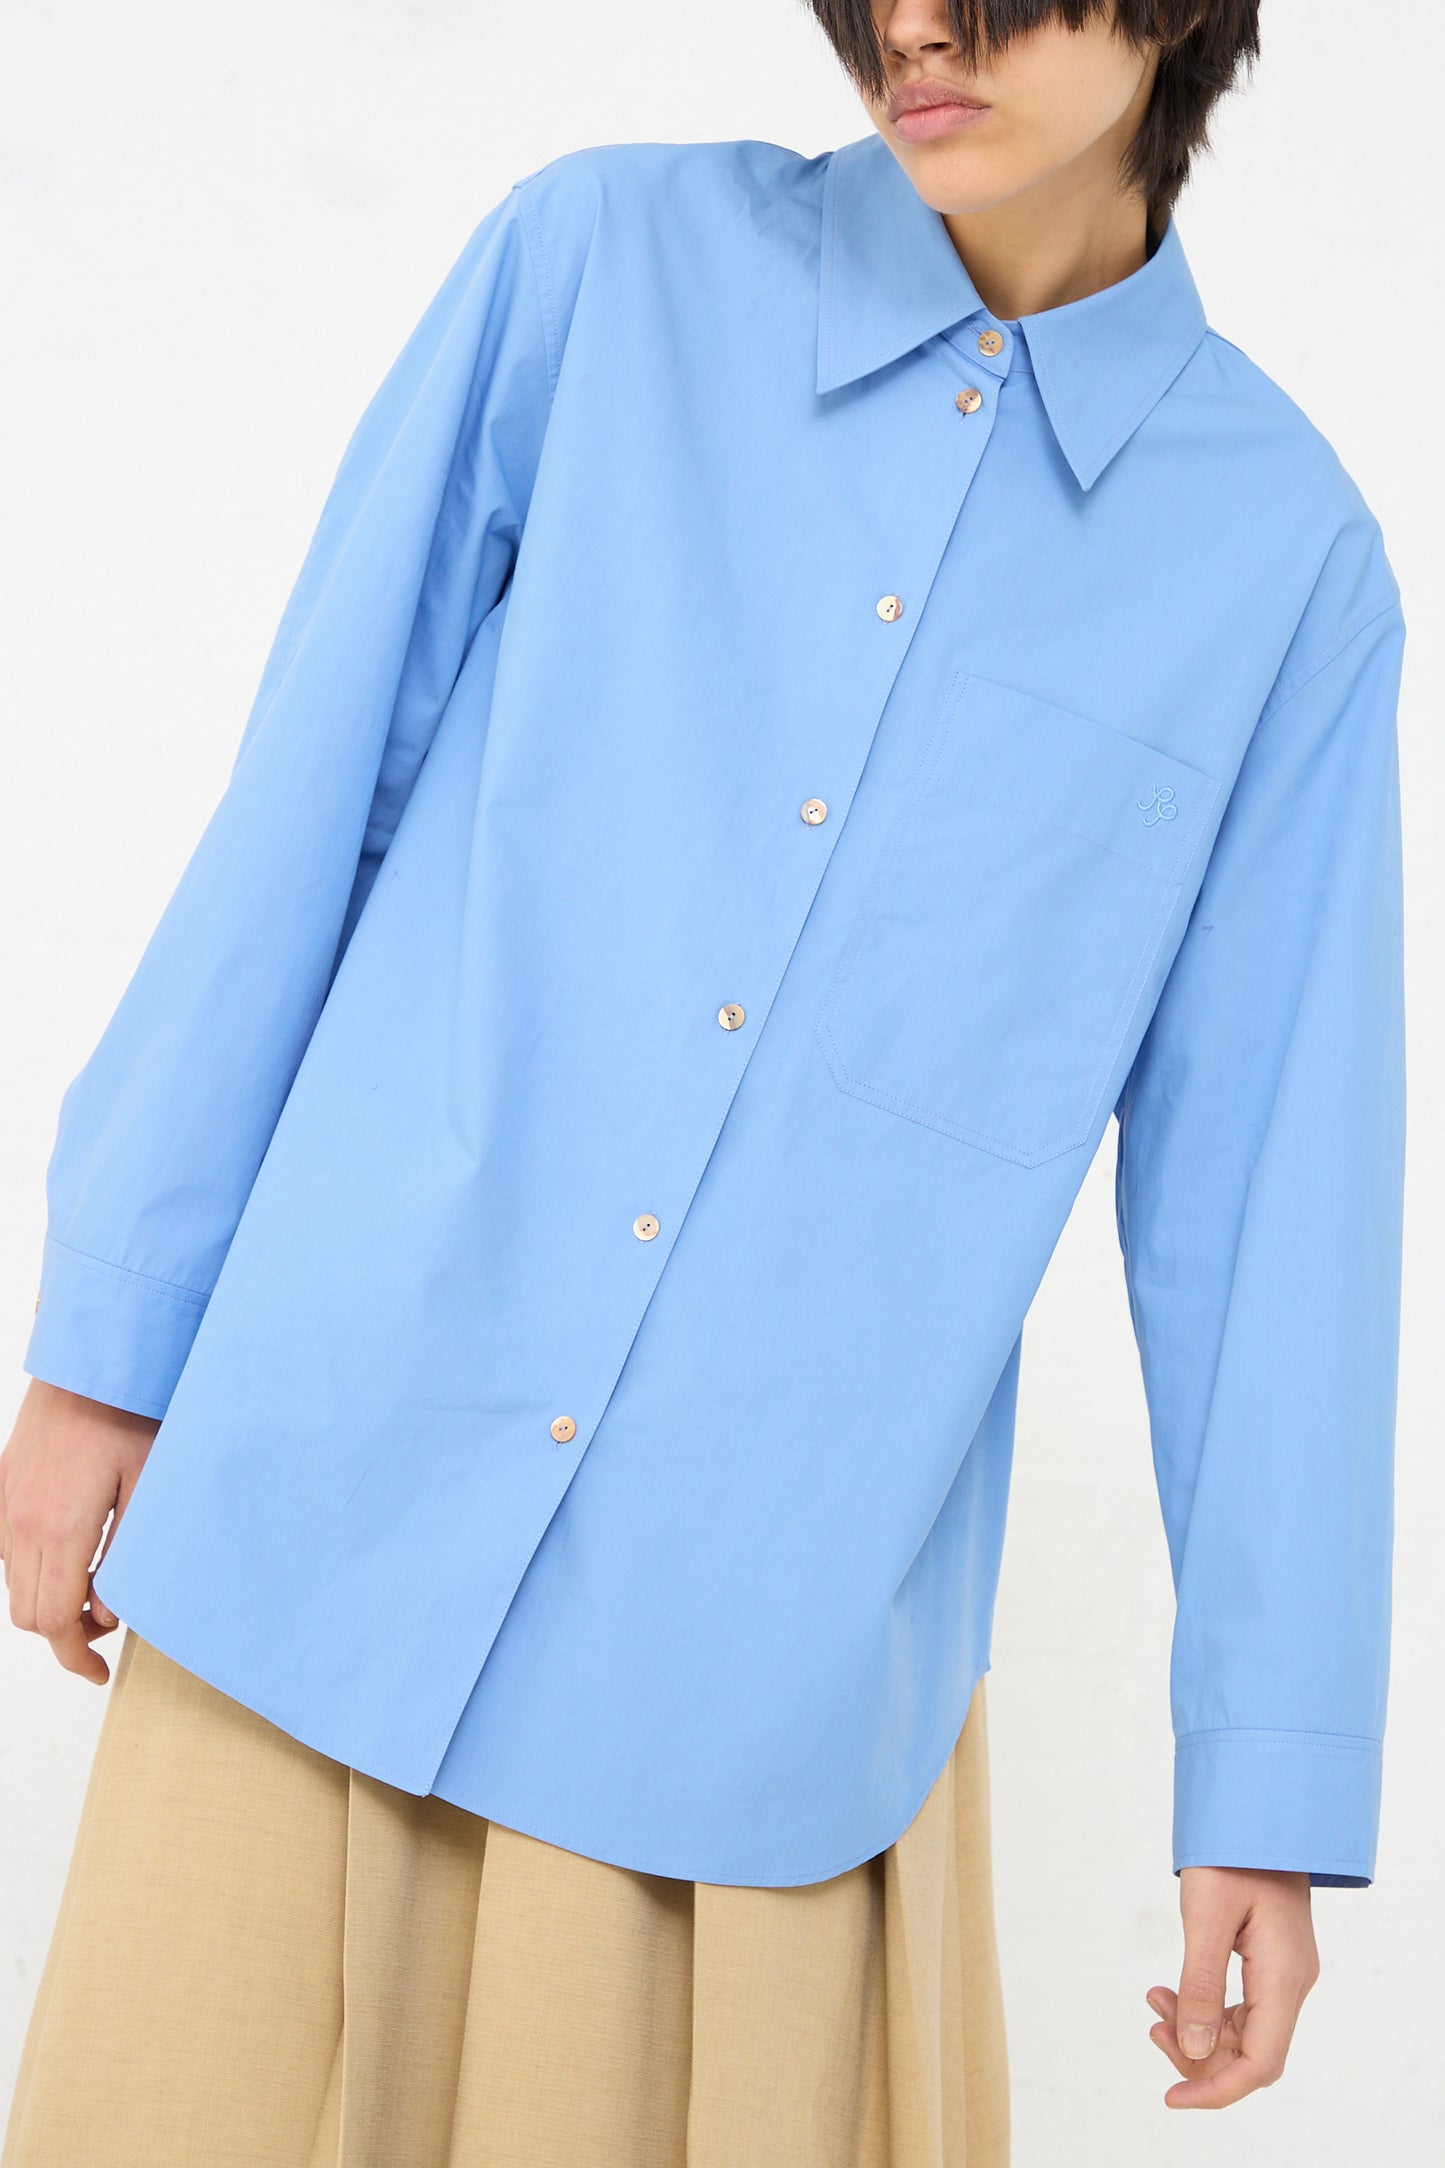 A woman wearing an oversized Caprice Shirt in Blue by Rejina Pyo.